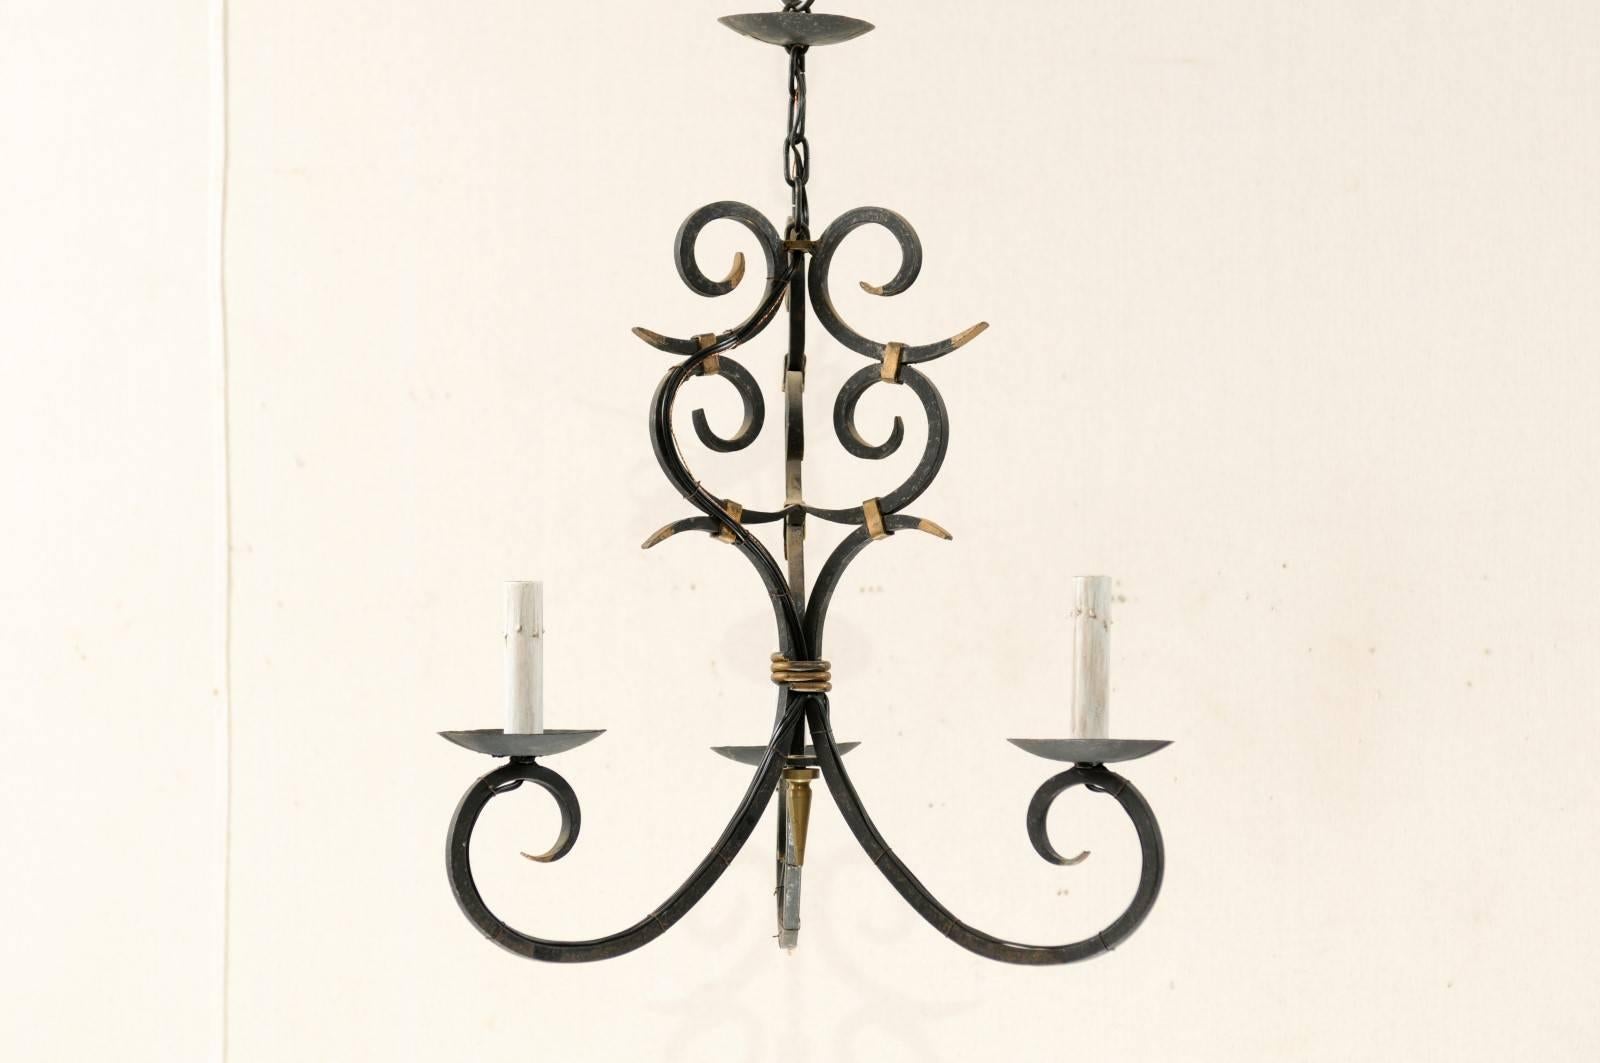 A French forged iron three-light chandelier. This dark colored French mid-20th century chandelier of forged iron is made of scrolled arms and scrolled crest with gilded elements. This French chandelier has also been rewired for the US and comes with